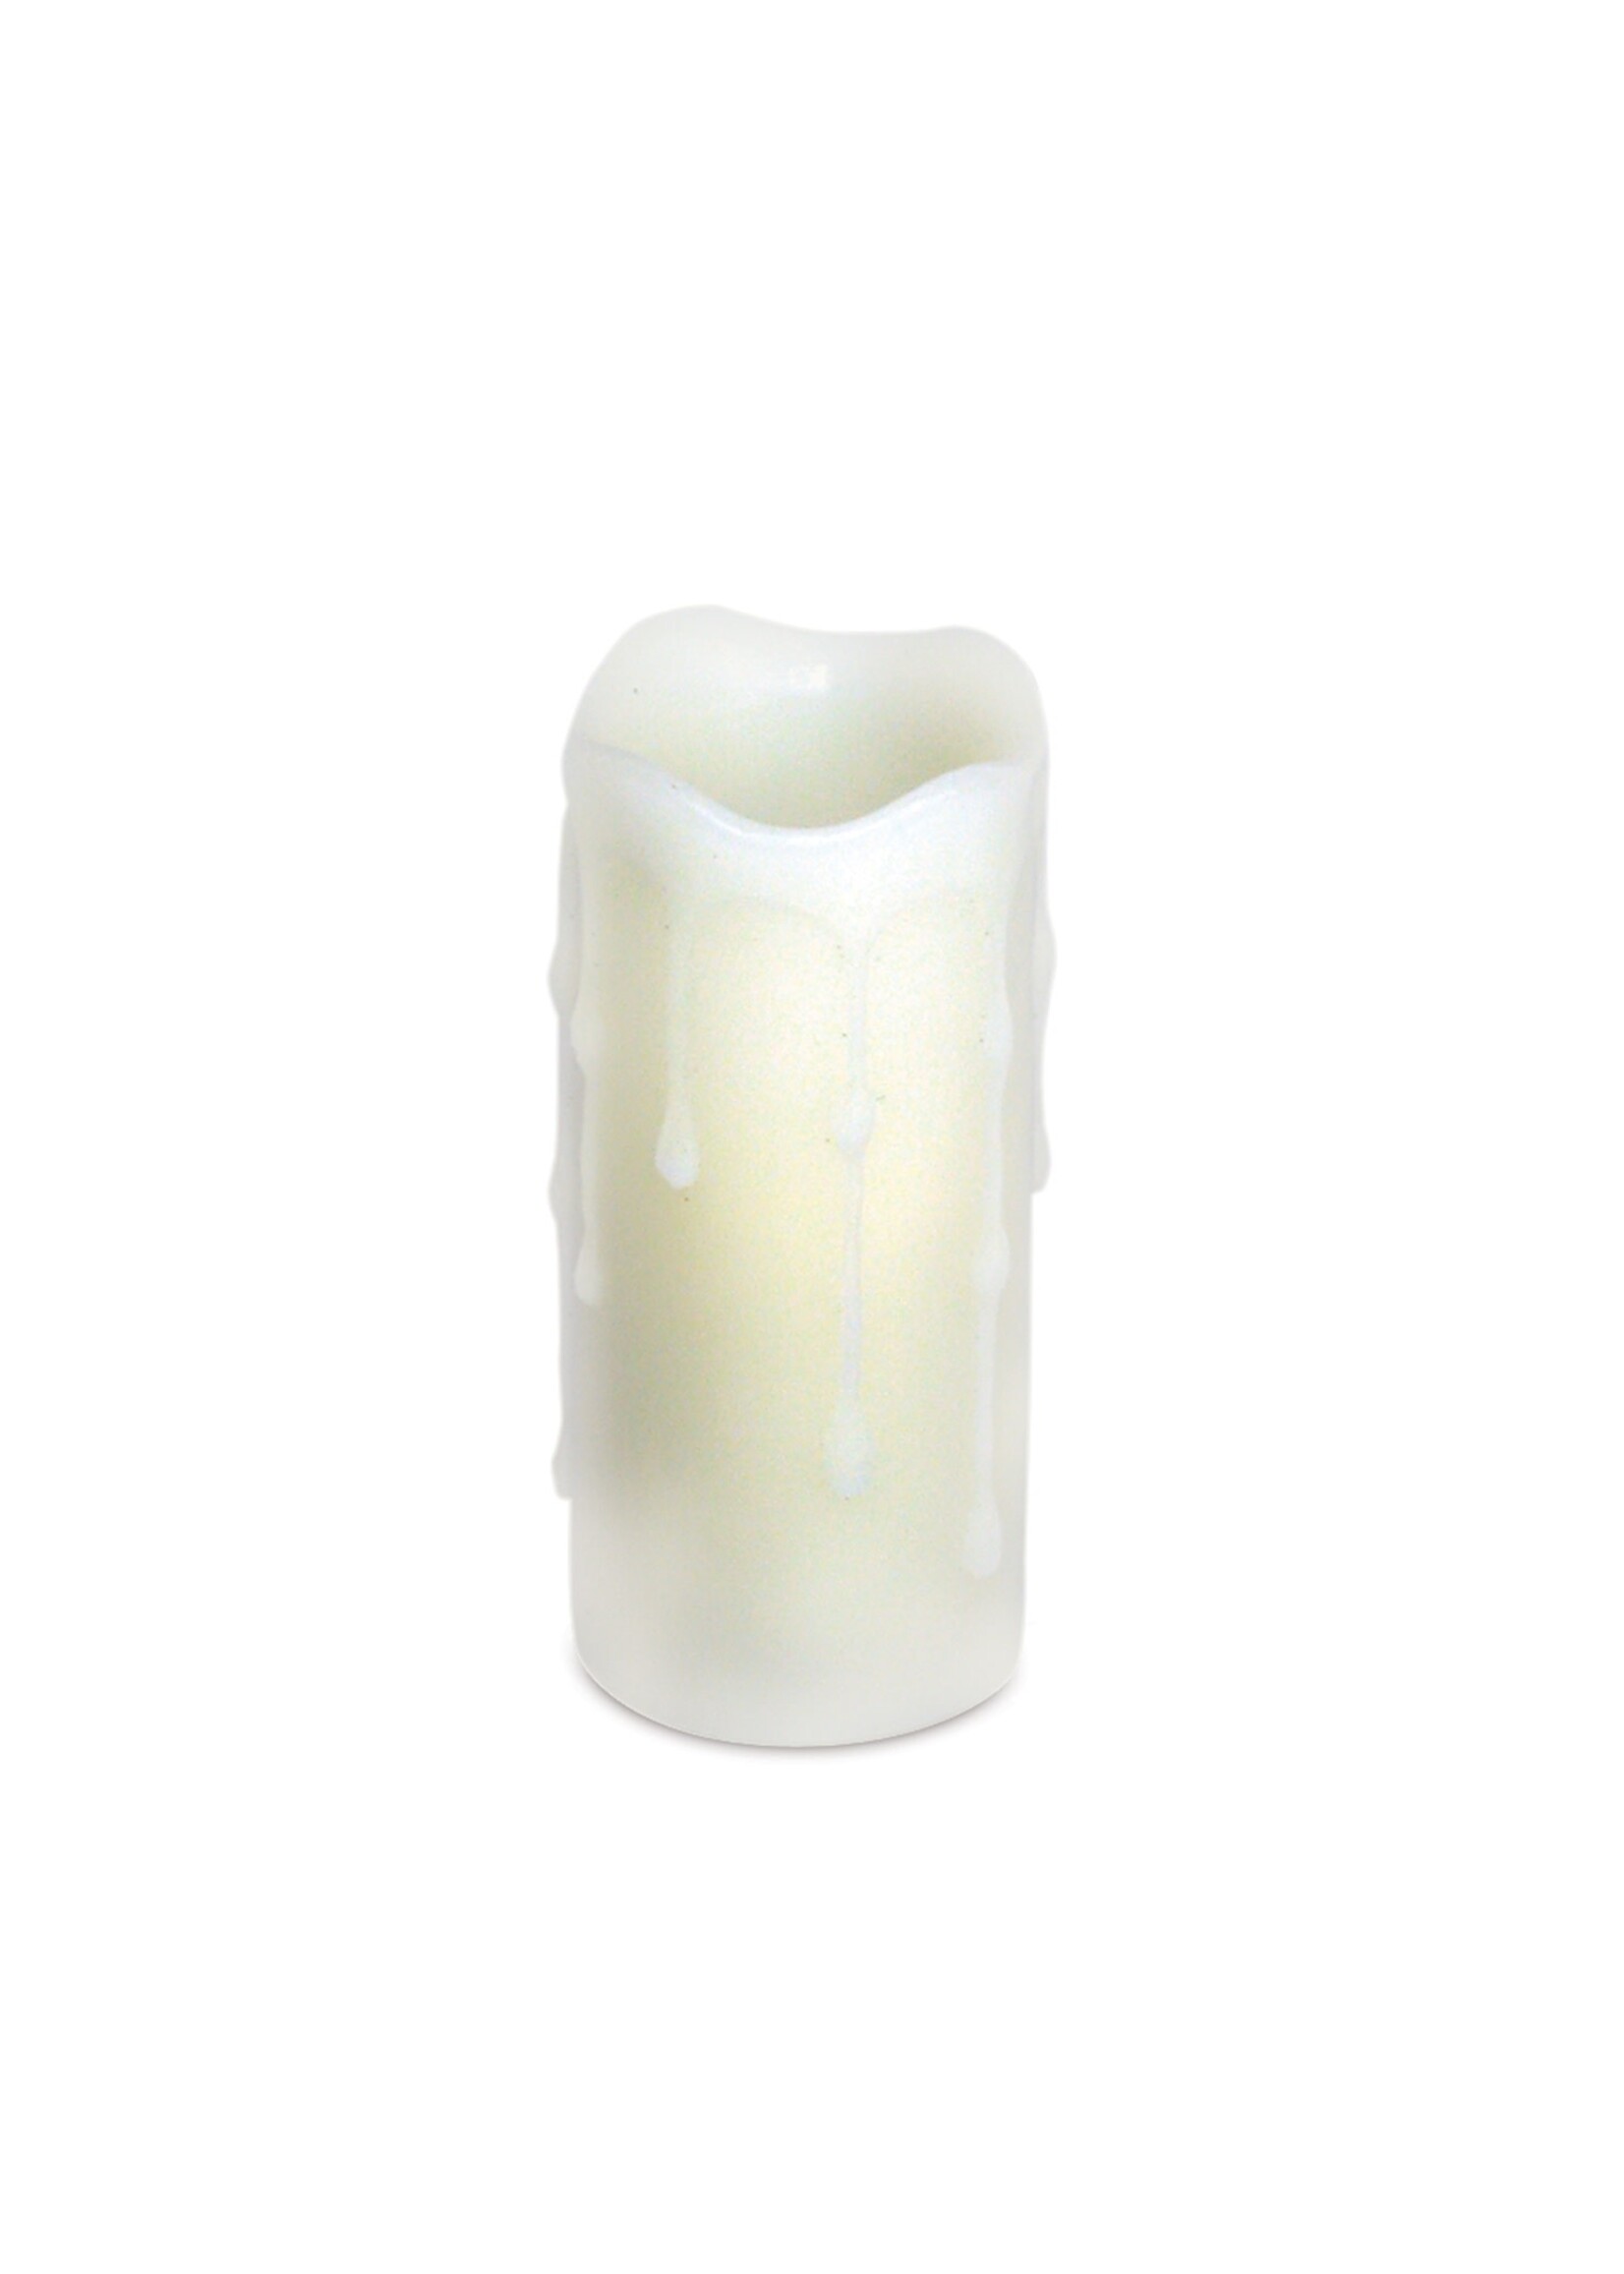 LED Wax Dripping Pillar Candle